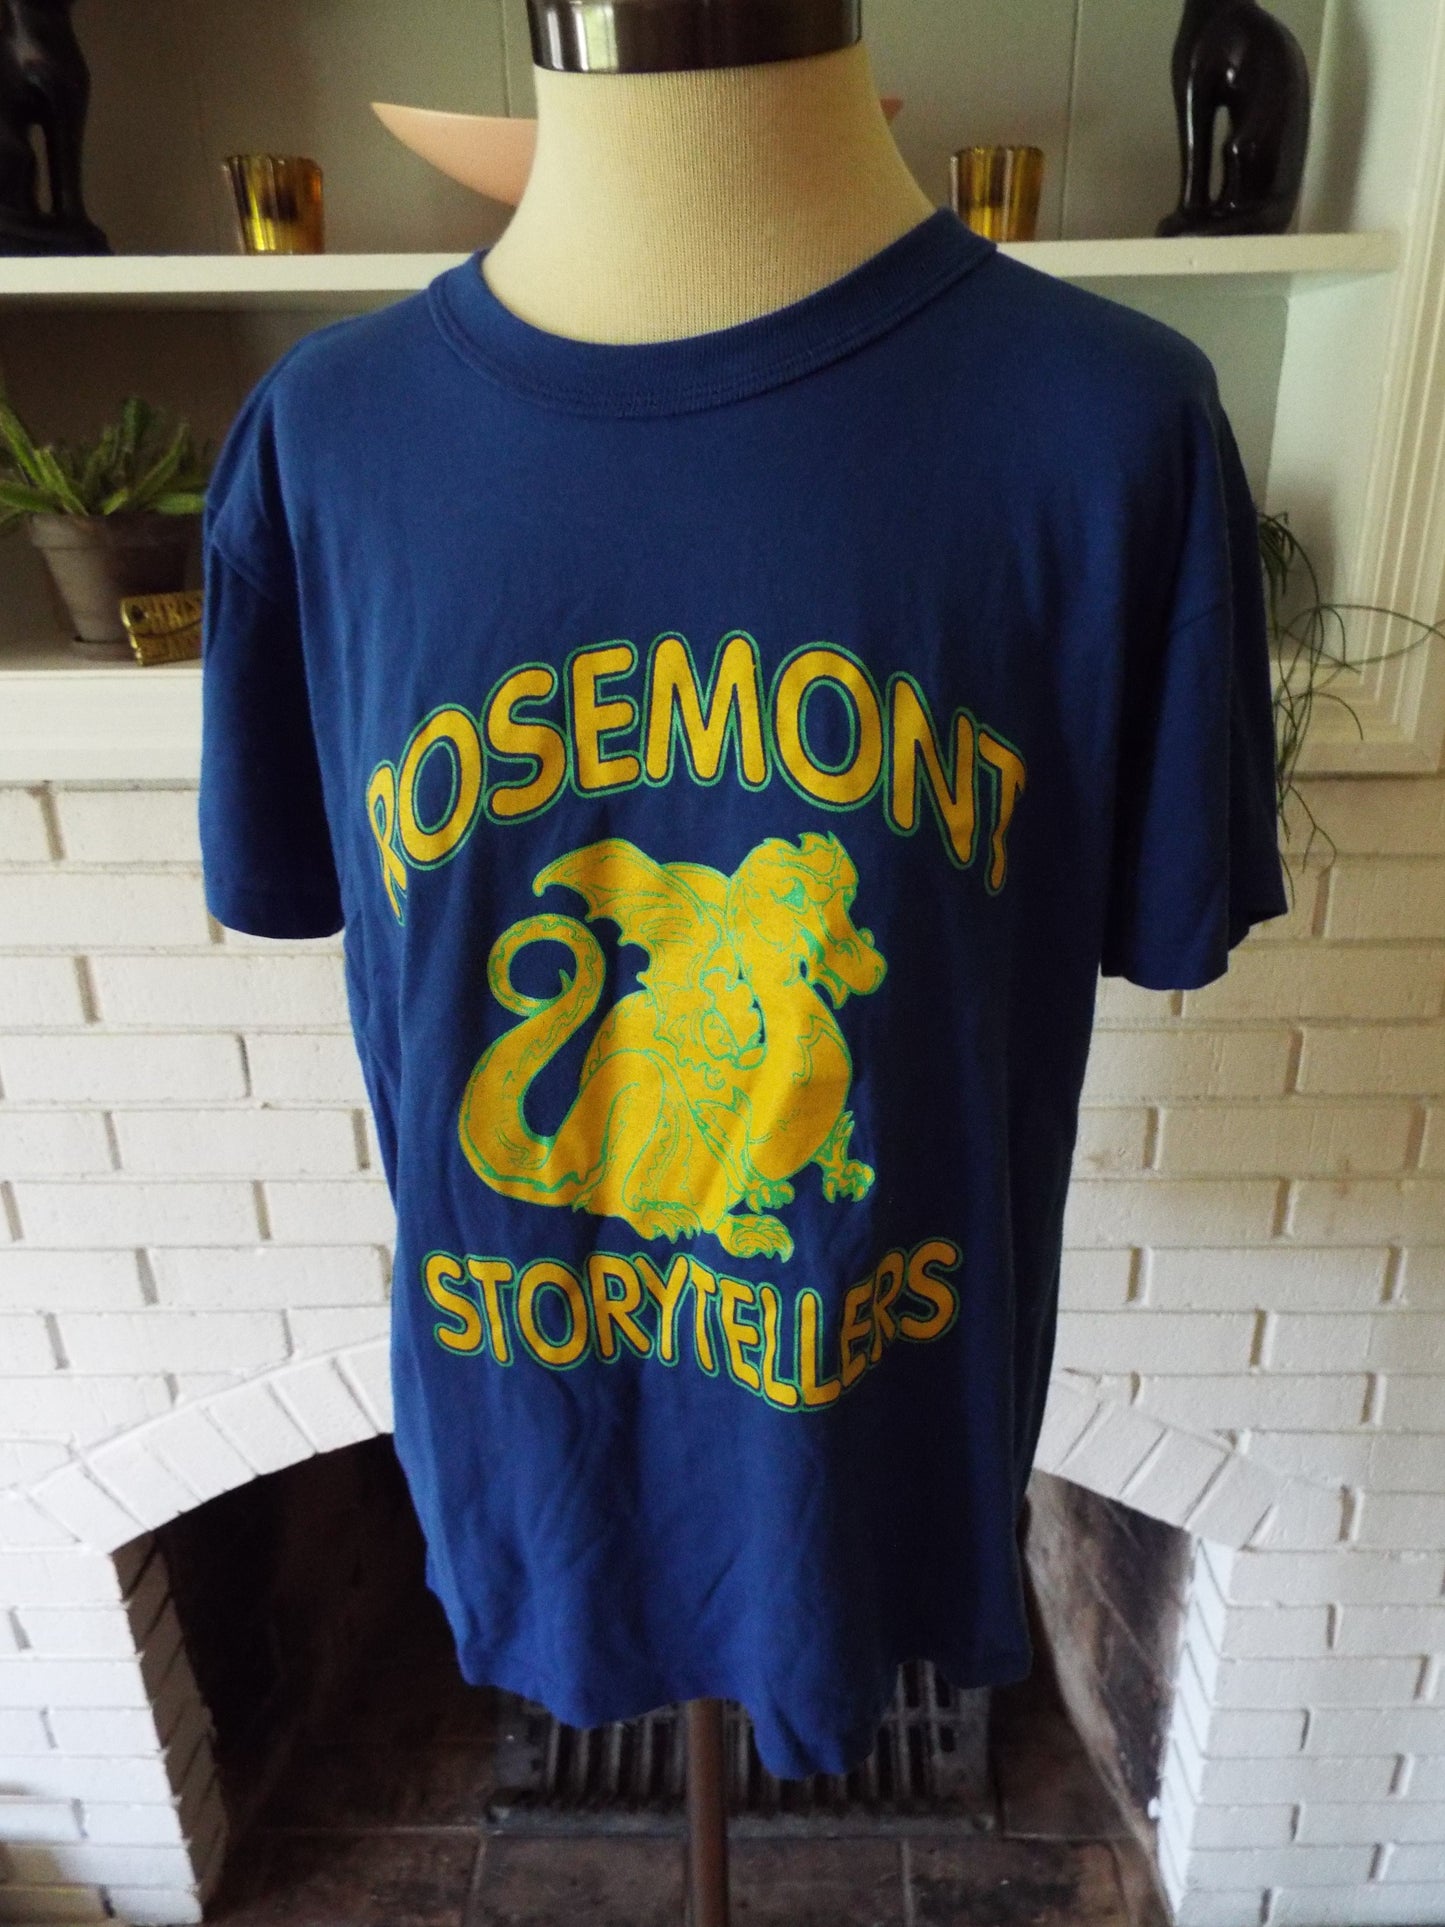 Vintage Rosemont Storytellers T-Shirt by Russell Athletic